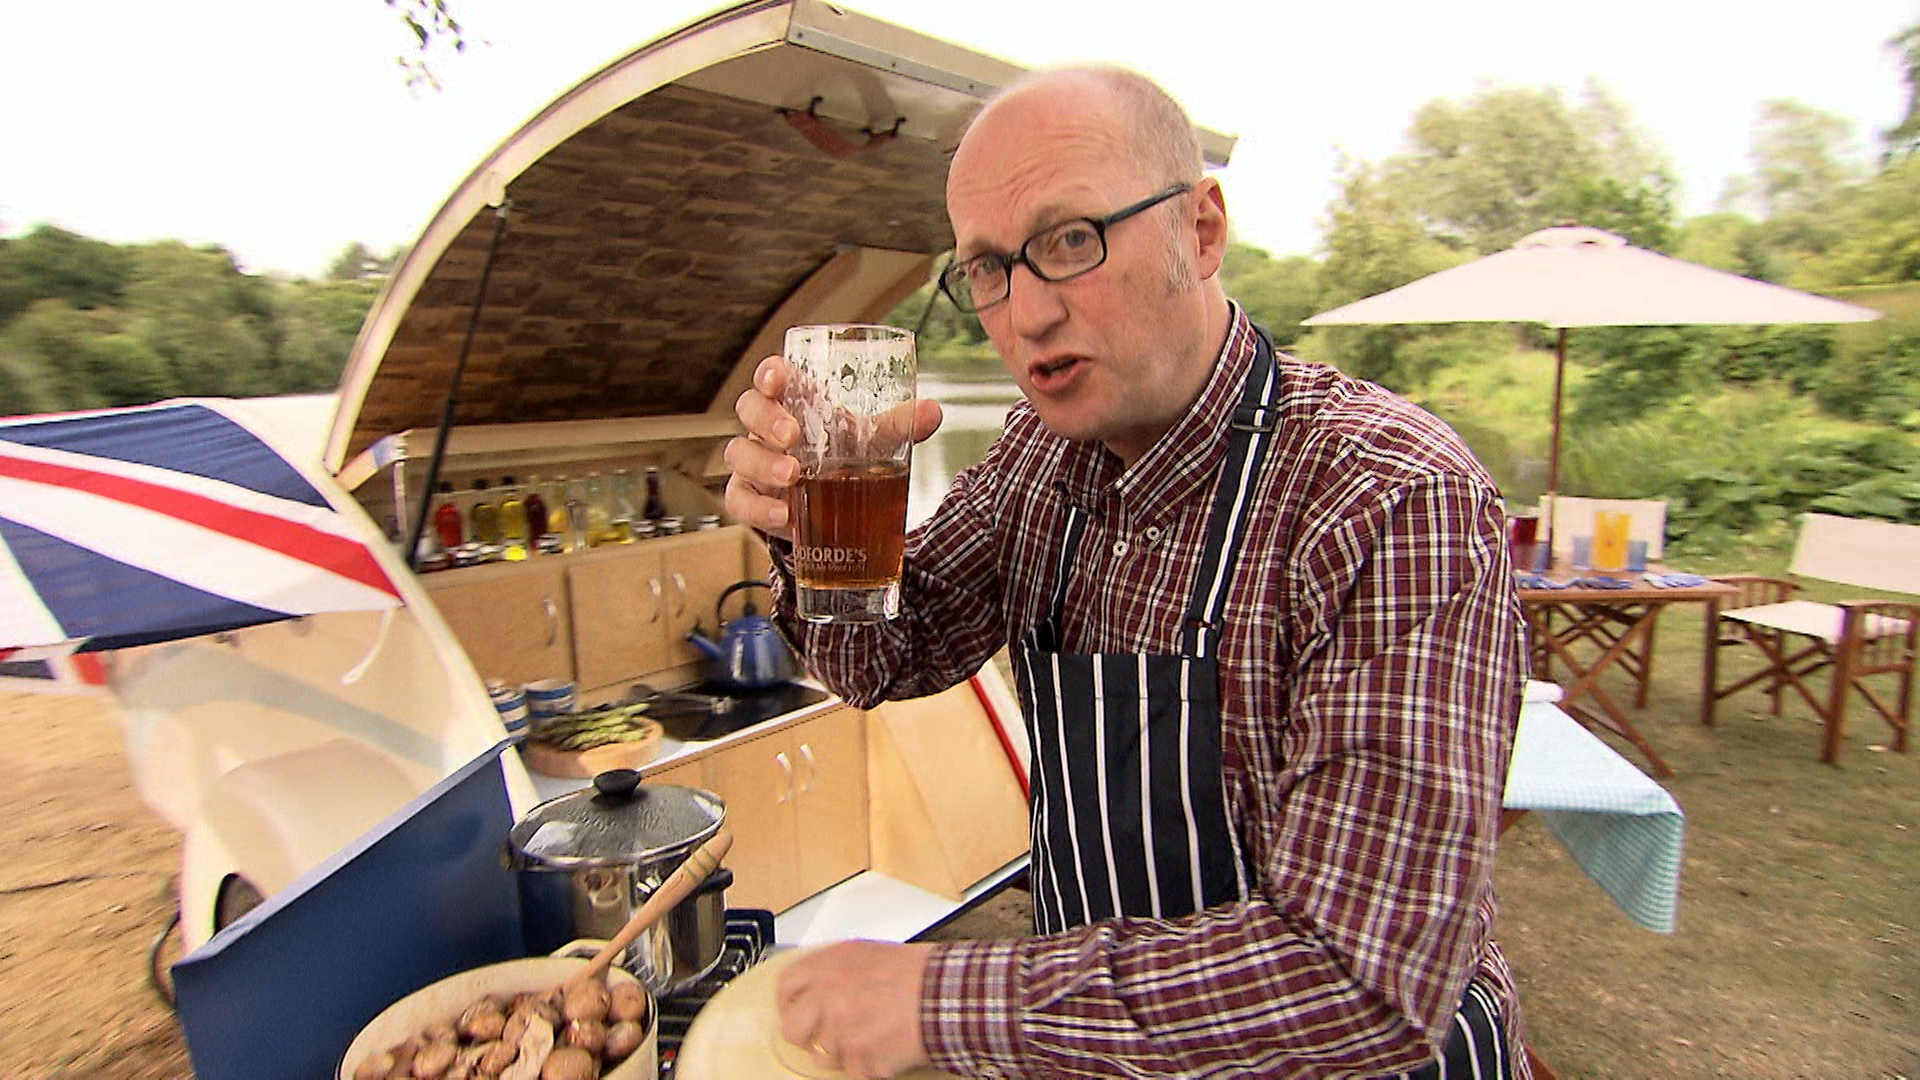 Drink a beer with Ade as he grills some food. 